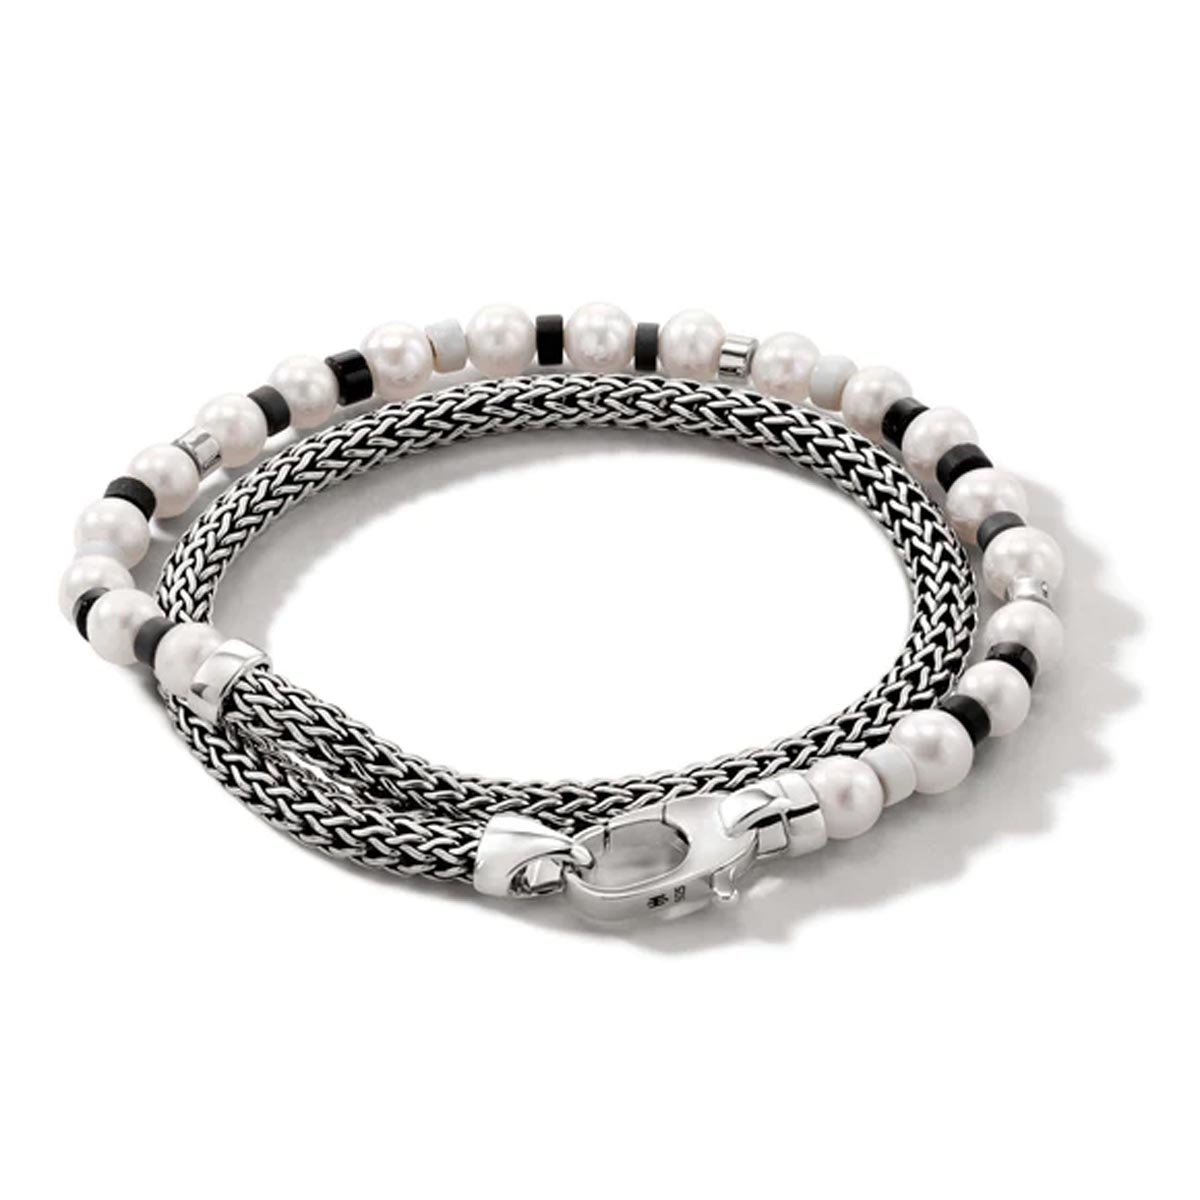 John Hardy Colorblock Collection Cultured Freshwater Pearl Black Onyx and Hematite Bead Bracelet in Sterling Silver with White Enamel (5.5-6mm pearls)